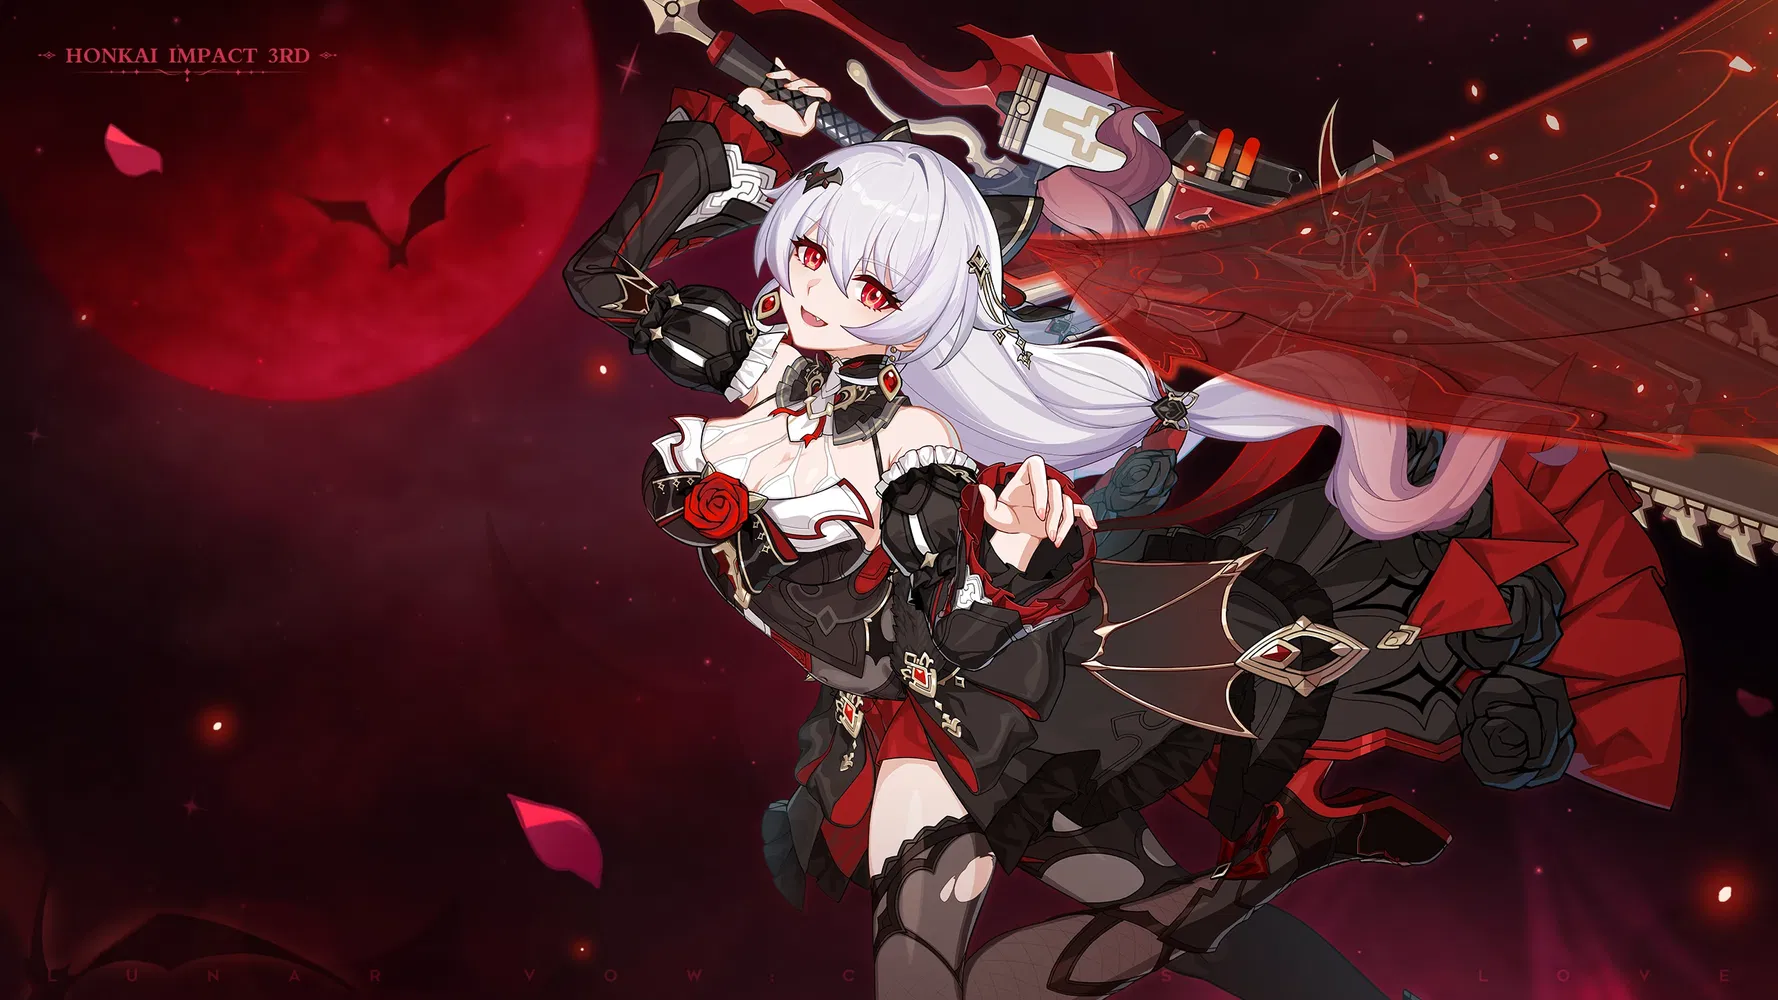 Theresa Apocalypse Honkai Impact 3rd Looking At Viewer Dracula Video Game Characters Anime Girls Red 1778x1000